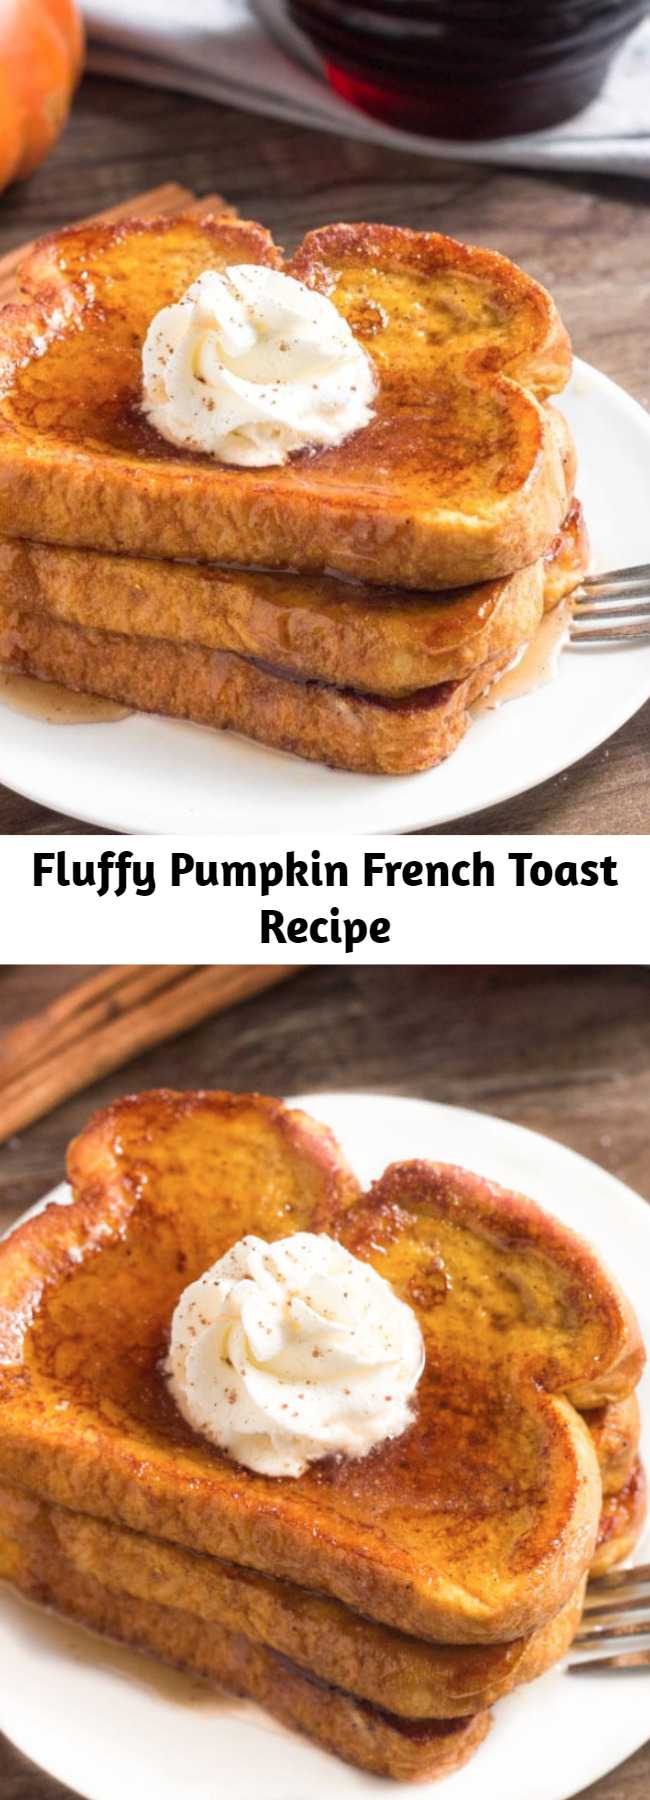 Fluffy Pumpkin French Toast Recipe - French toast that’s perfect easy, breakfast for fall! This Pumpkin French Toast is extra fluffy, filled with pumpkin spice & tastes amazing drizzled in maple syrup. #fall #pumpkin #pumpkinspice #frenchtoast